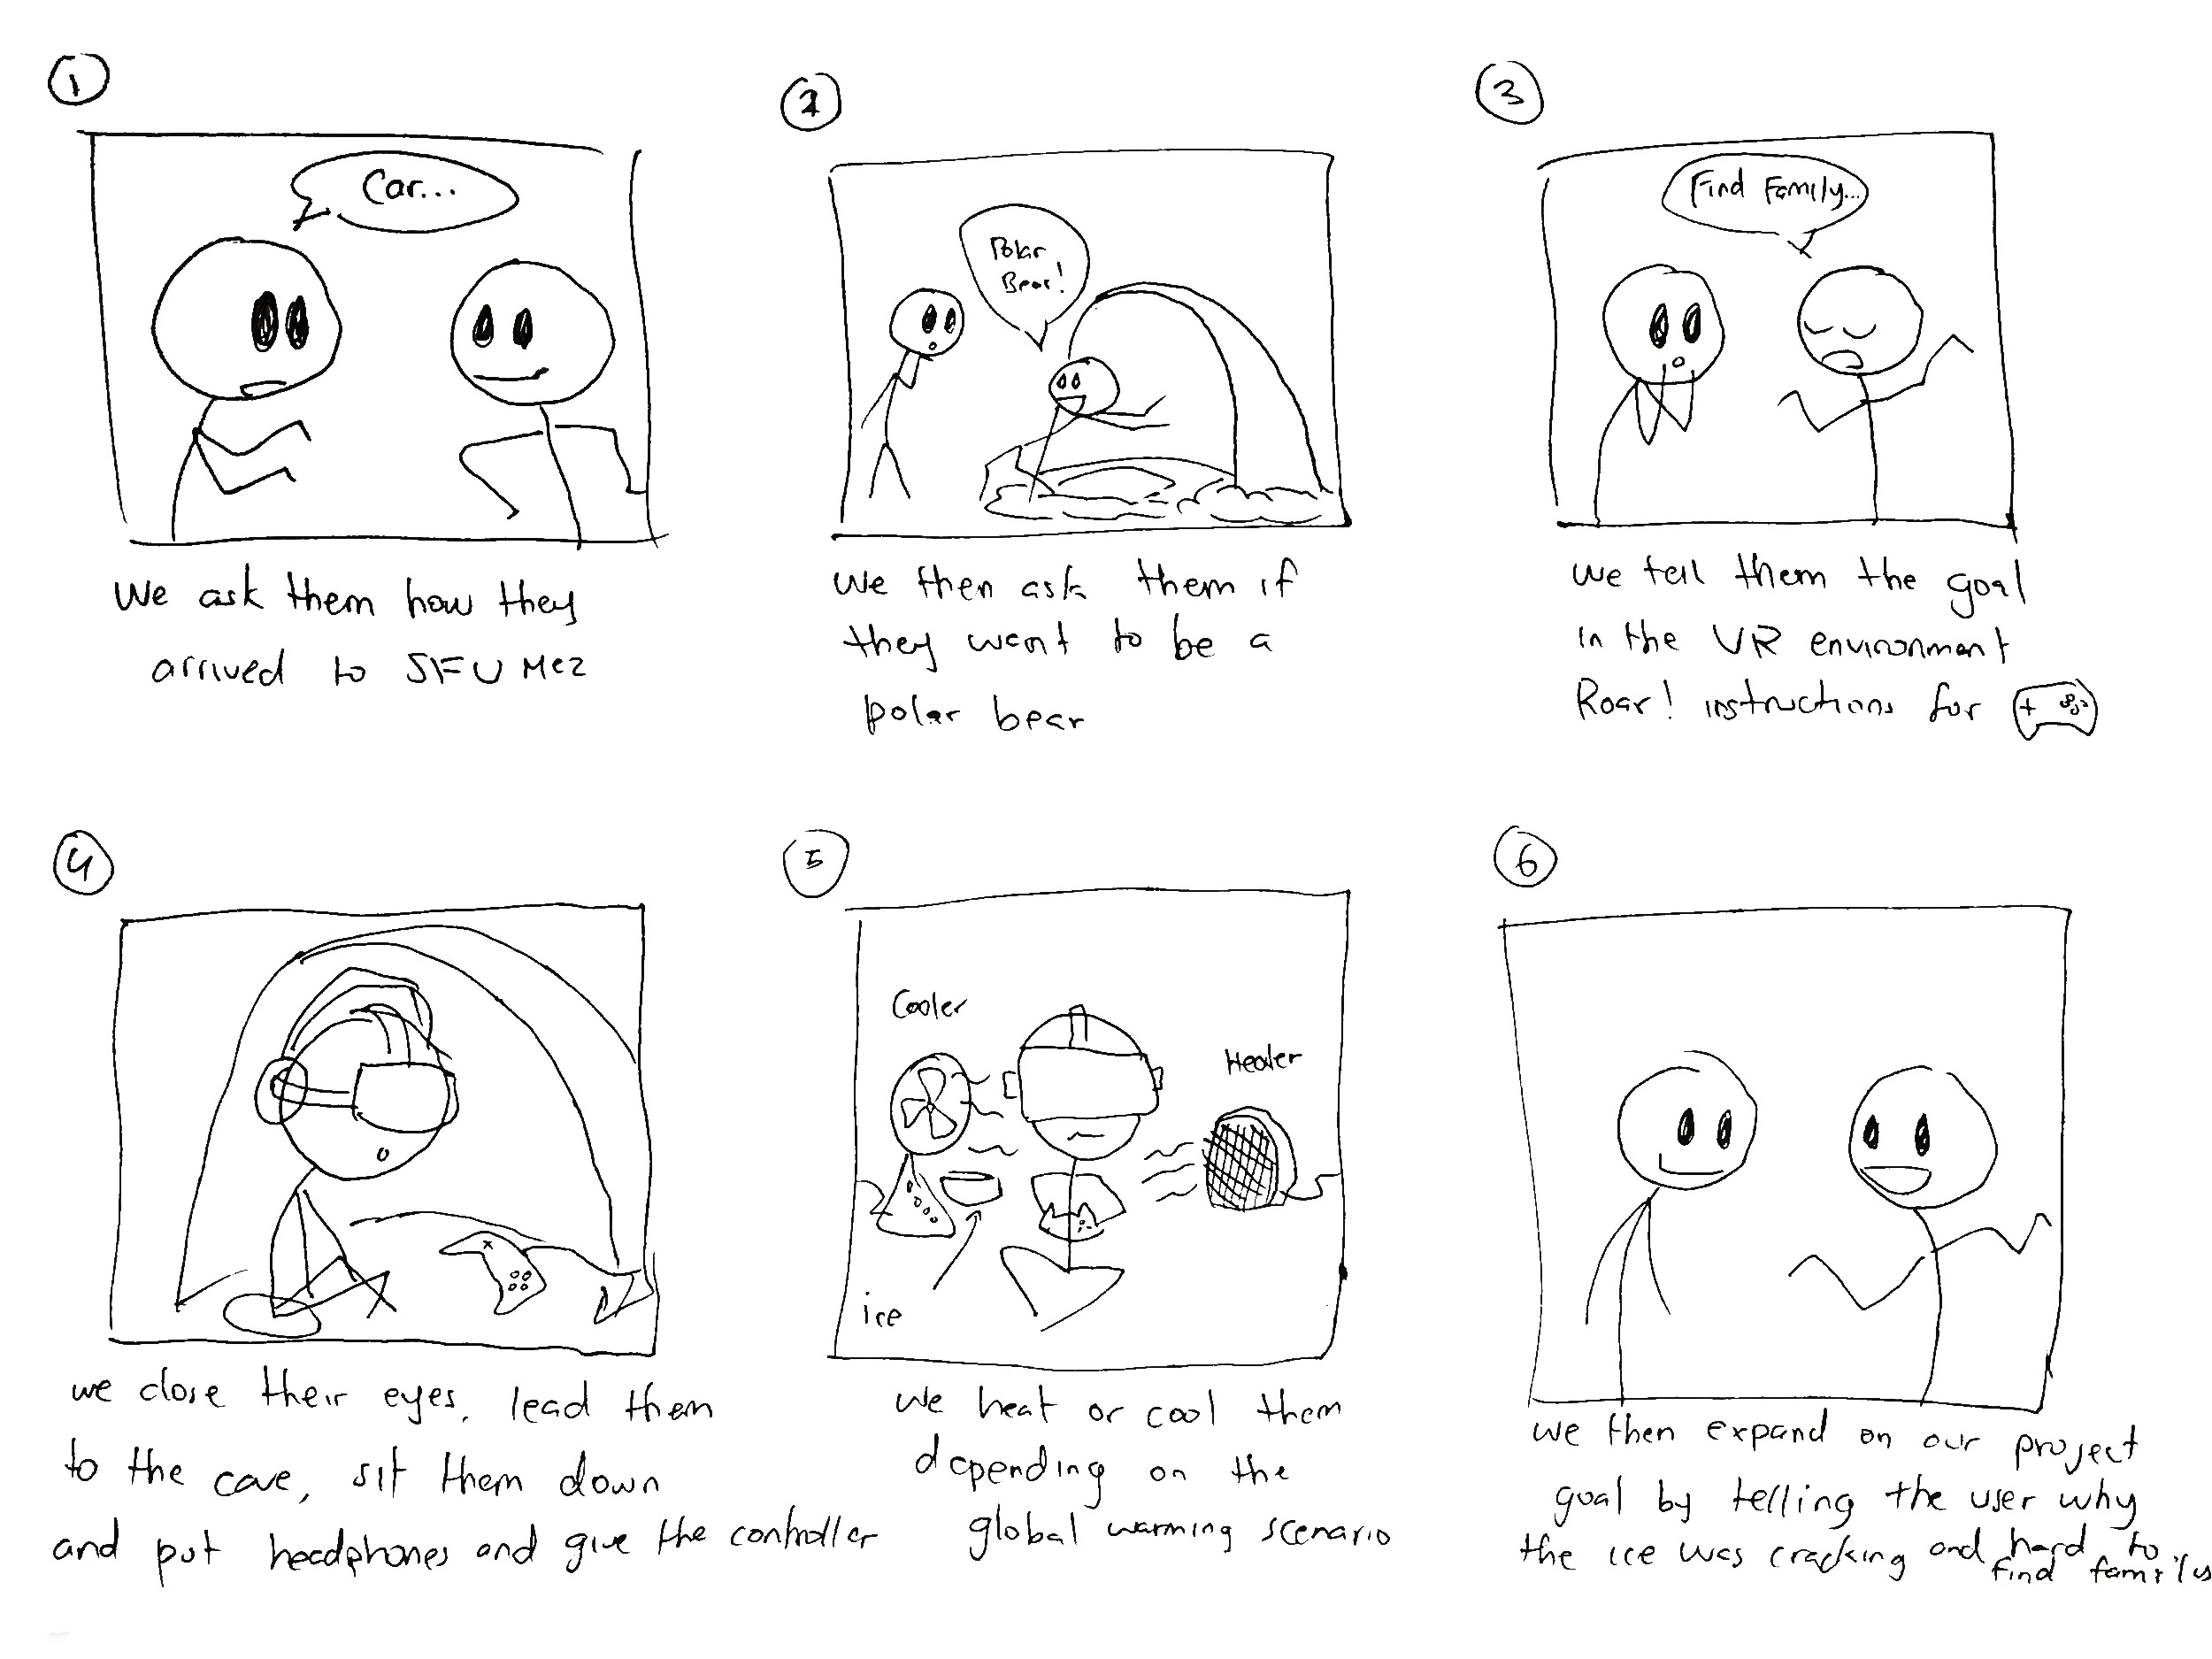 A storyboard sketch of the procedure of the Echo experience